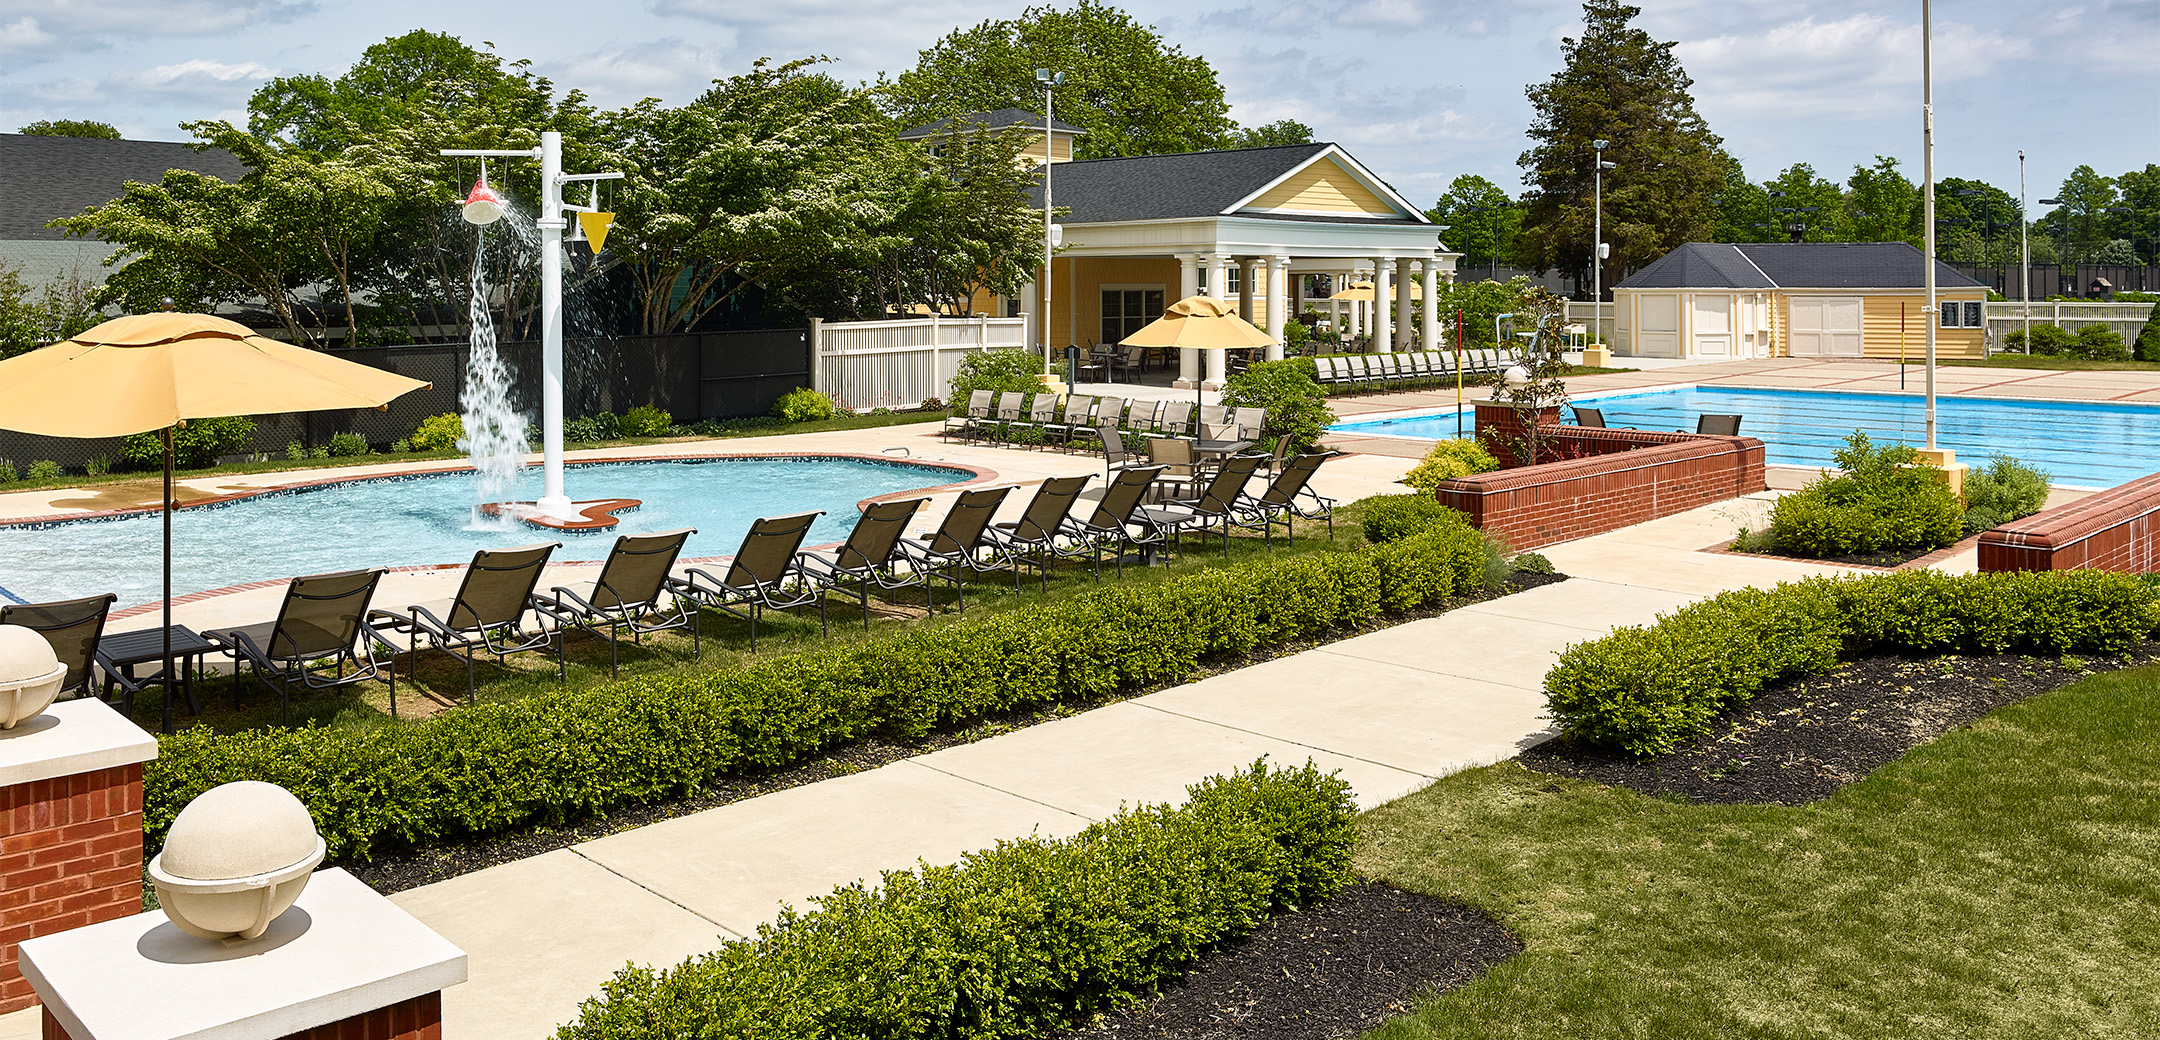 The Philadelphia Cricket Club`s outside pool featuring two large separate pools, multiple pool lounge chairs, a pool house in the far right, and the snack bar facility in the back behind the lap pool.